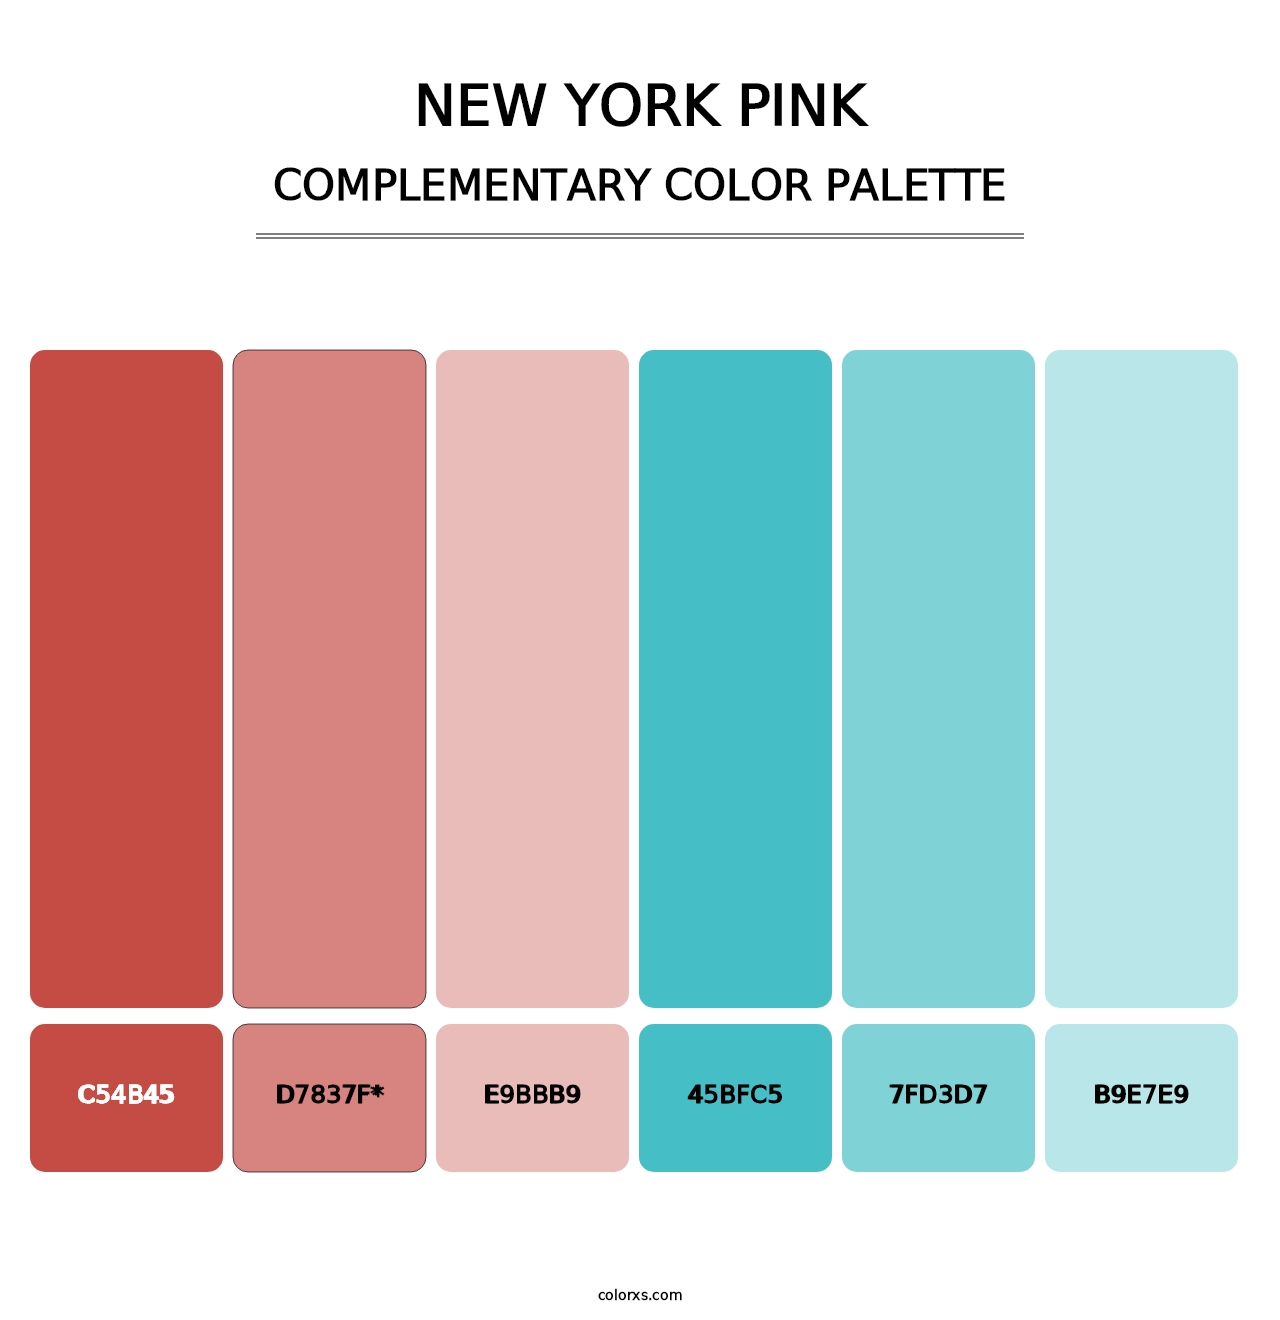 New York Pink - Complementary Color Palette